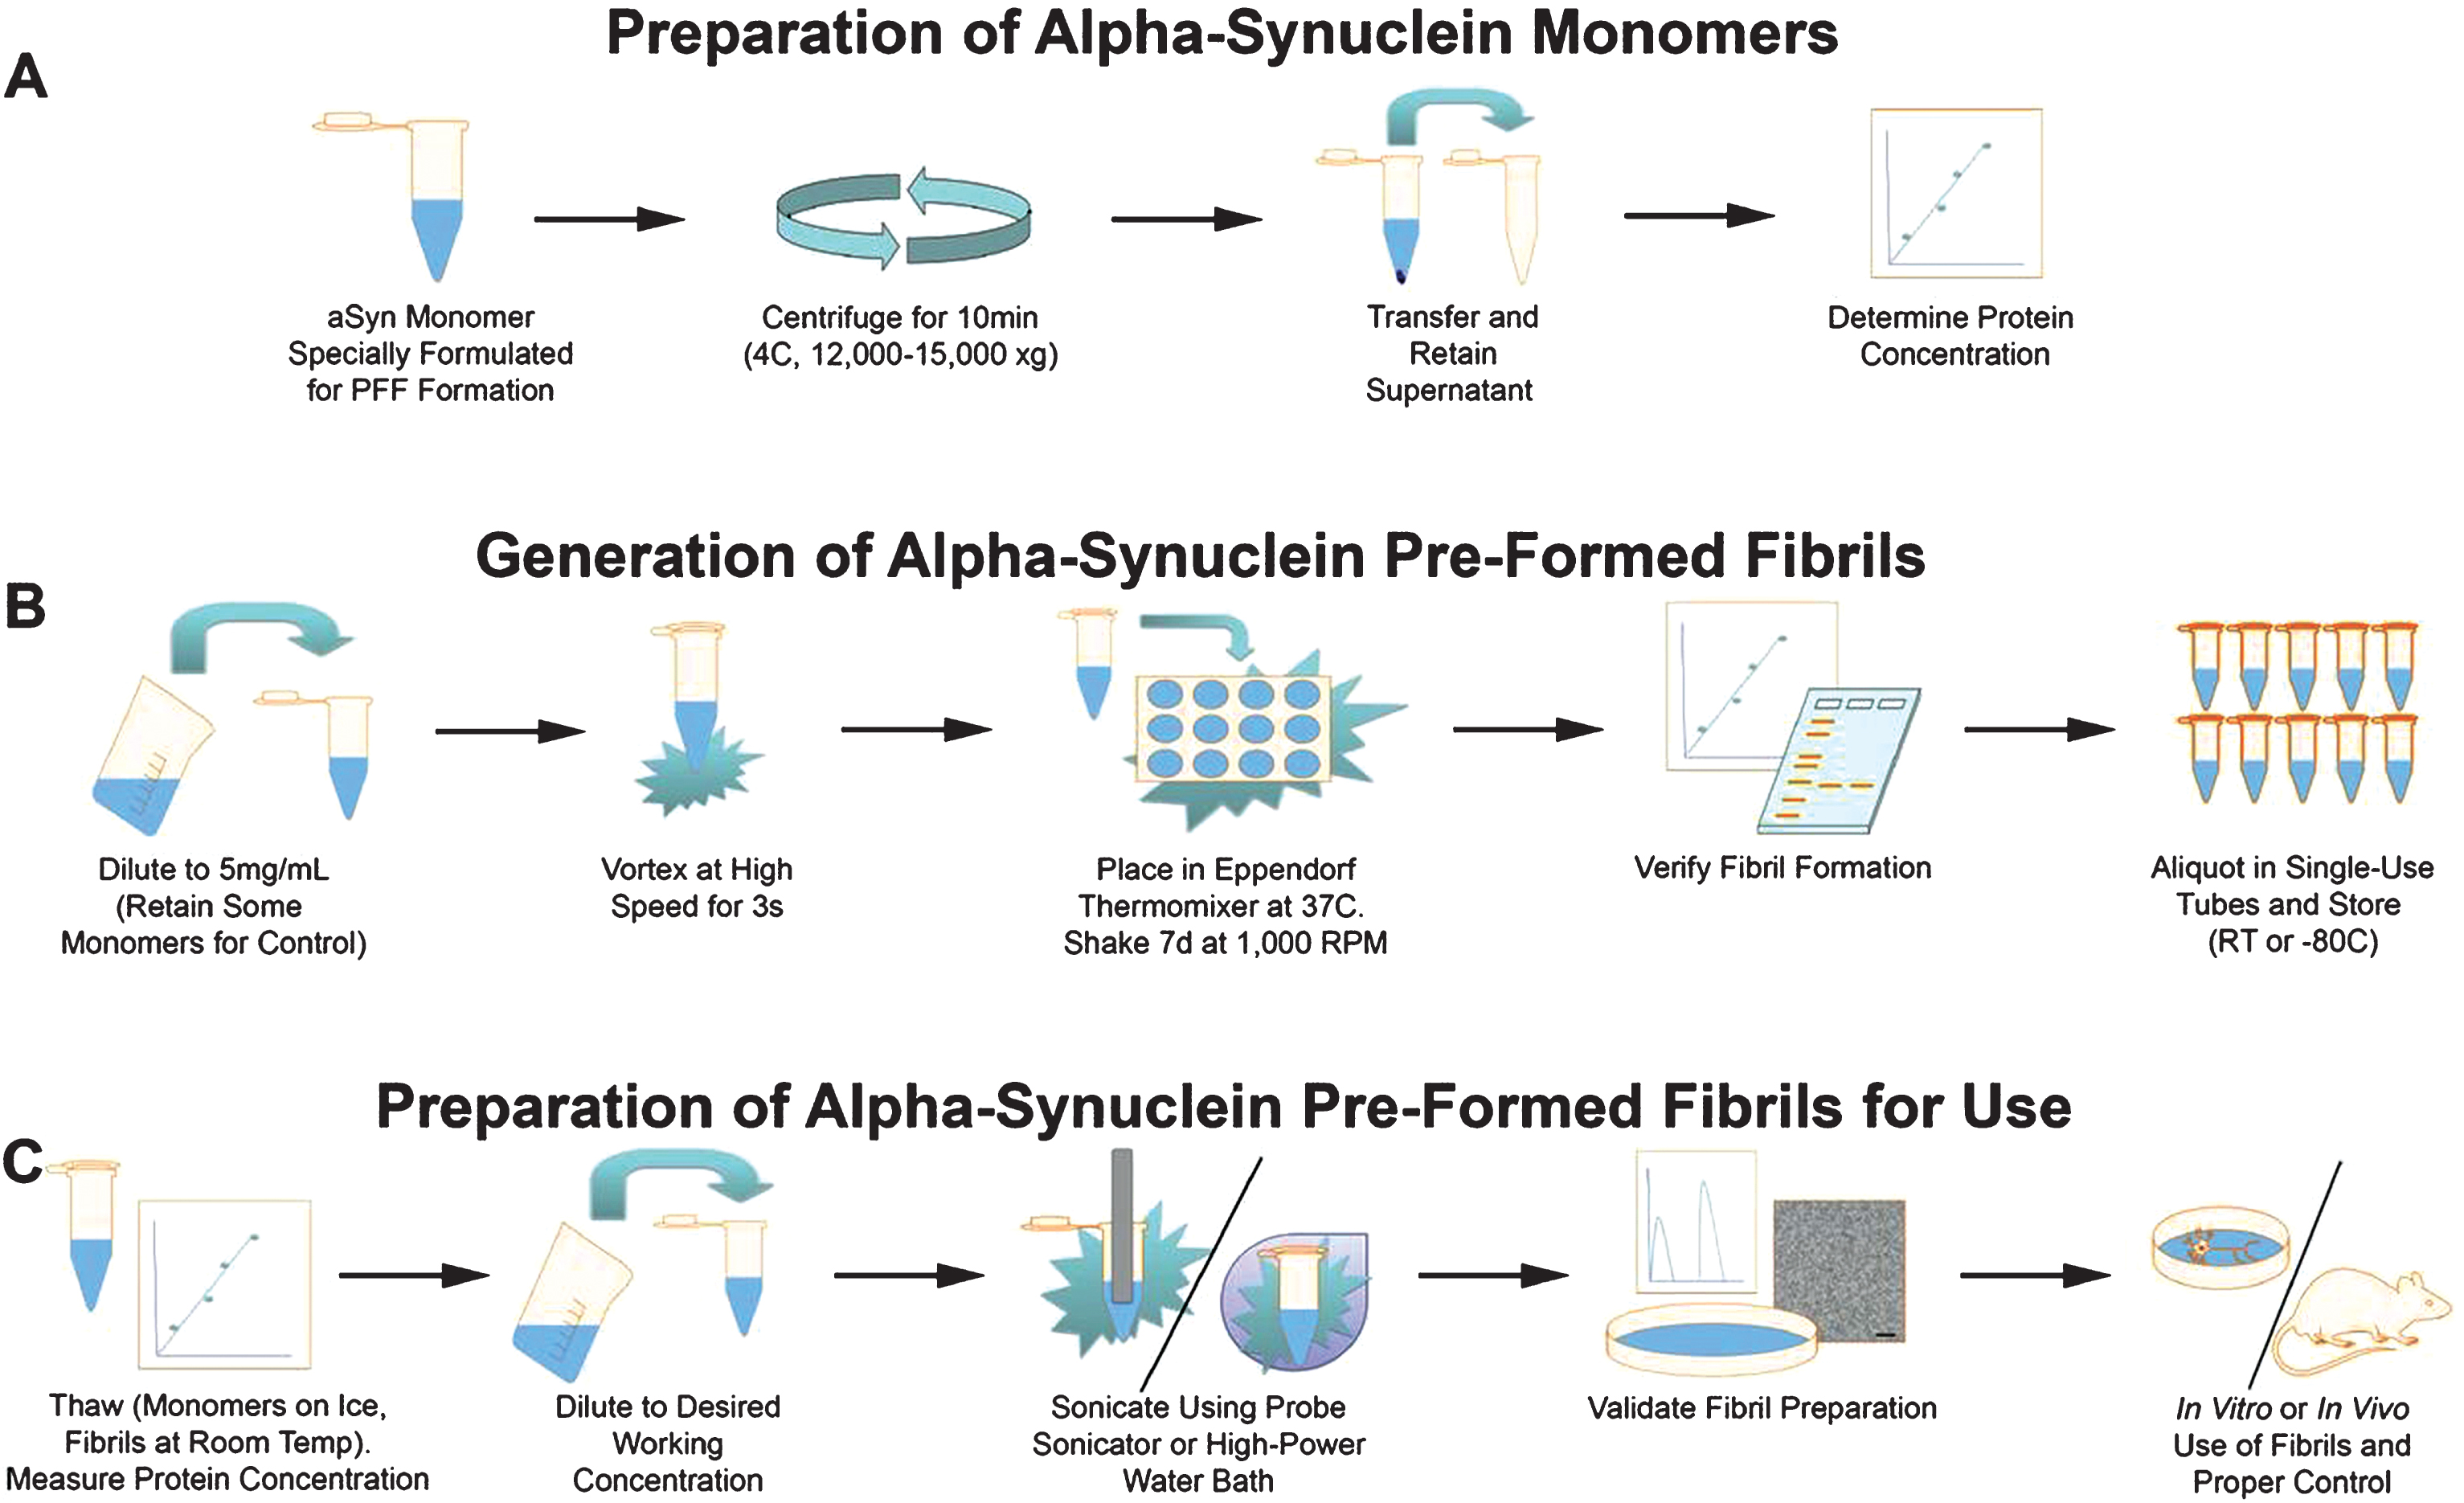 Schematic depiction of the protocol for generating alpha-synuclein pre-formed fibrils (aSyn PFFs) from specially formulated monomers. The protocol for generating aSyn PFFs from monomers includes three main stages, (A) preparation of aSyn monomers, (B) generation of aSyn PFFs from monomers, and (C) preparation of aSyn PFFS for use. A) The protocol begins with the monomeric recombinant aSyn protein specially formulated for aSyn PFF development, which is then centrifuged for the supernatant to be transferred and protein concentration to be measured. B) To generate aSyn PFFs, the solution is diluted, vortexed, and incubated at 37°C shaking for 7 days before quality control and storage. Please note that a portion of the monomeric starting material should be set aside at the beginning of this step for use as a negative control in quality control experiments, with even larger quantities set aside if monomers are to be used as the control protein in model generation. C) On the day of use, an aliquot of aSyn PFFs should be thawed, diluted after the protein concentration has been re-measured, sonicated, and quality controlled prior to use. The protocol corresponding to this schematic can be found in the Supplementary Material. aSyn, alpha-synuclein; PFF, pre-formed fibril; s, seconds; d, days; RT, room temperature.